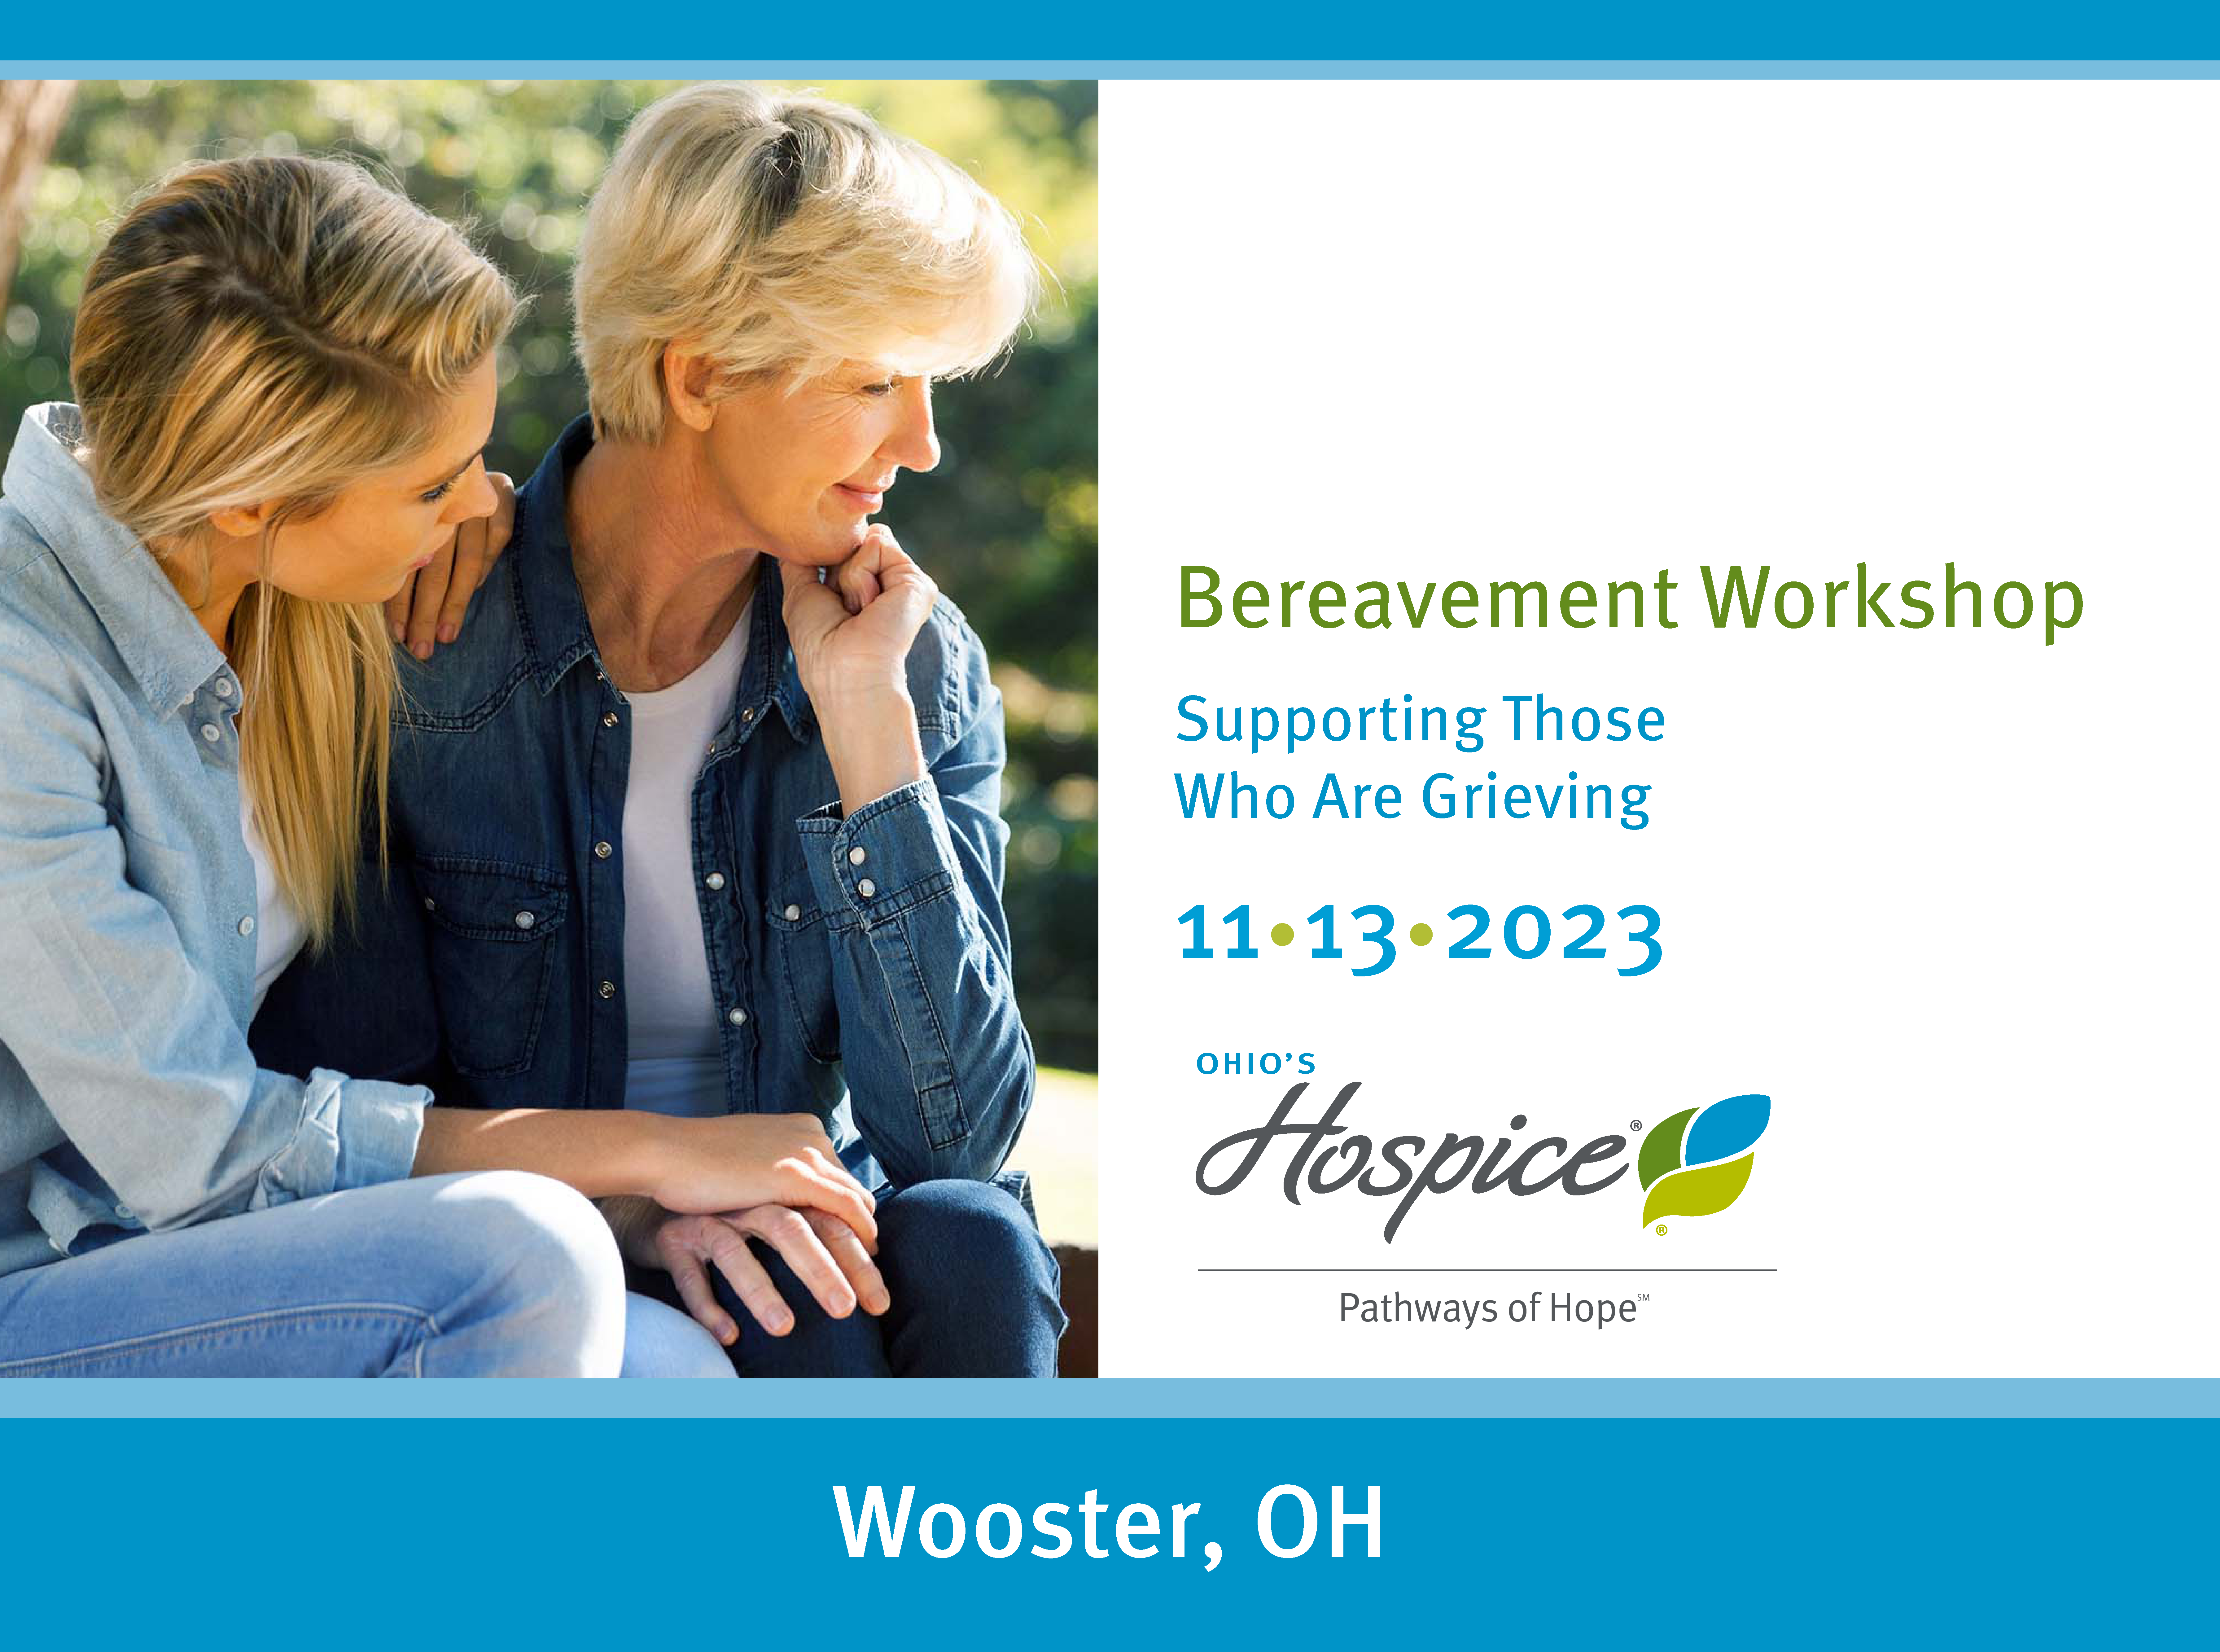 Bereavement Workshop. Supporting Those Who Are Grieving. 11/13/2023. Ohio's Hospice Pathways of Hope